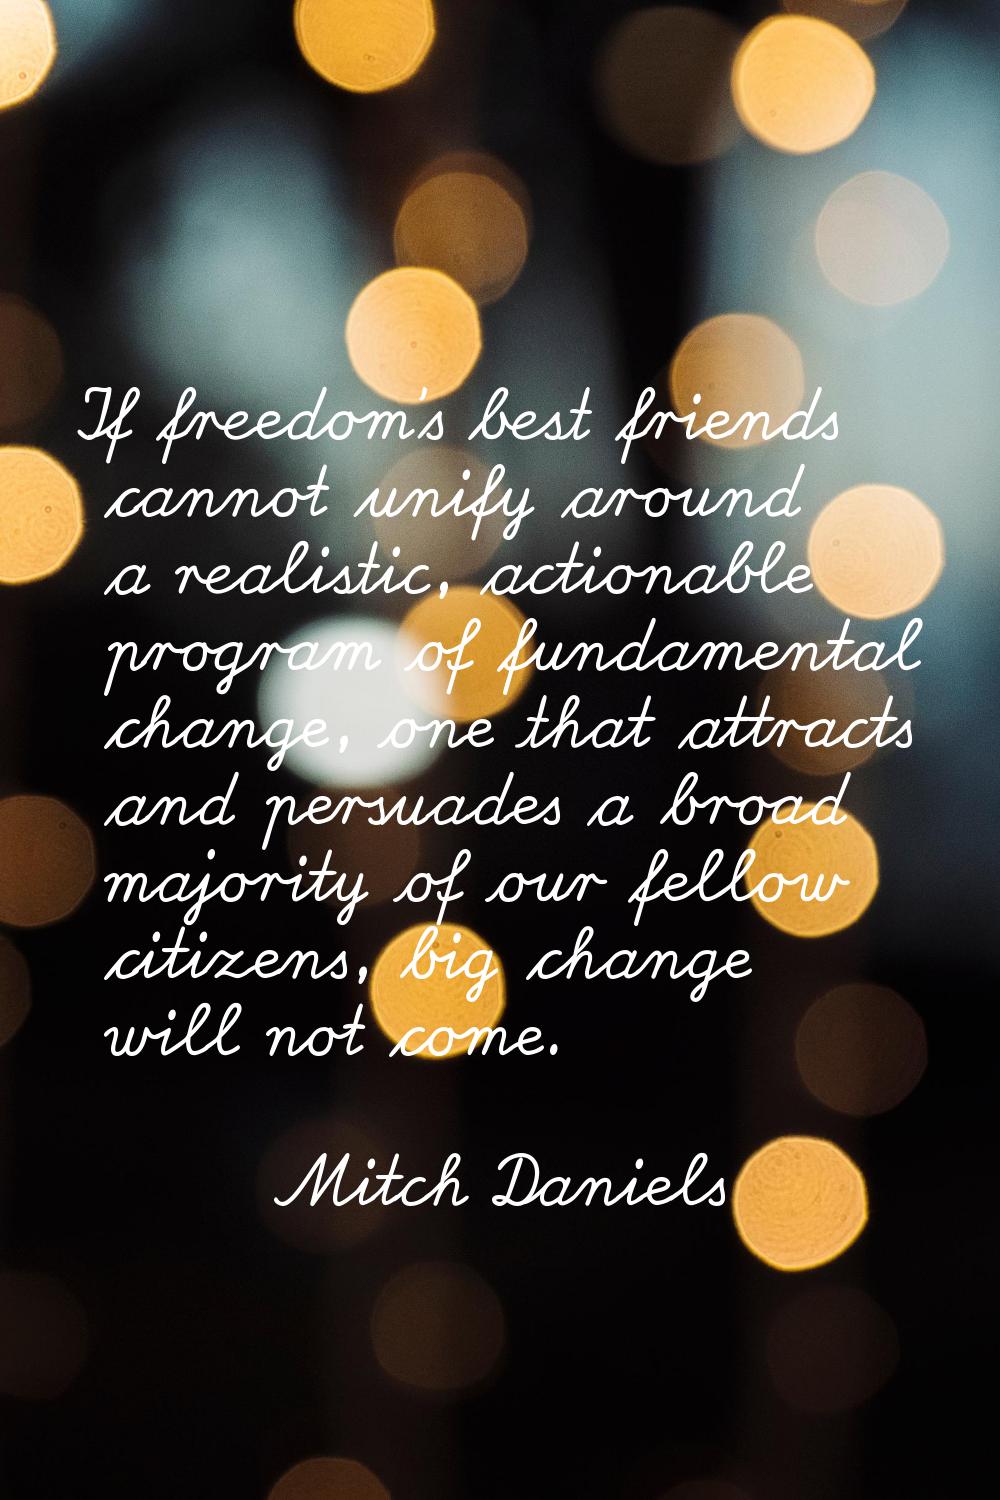 If freedom's best friends cannot unify around a realistic, actionable program of fundamental change